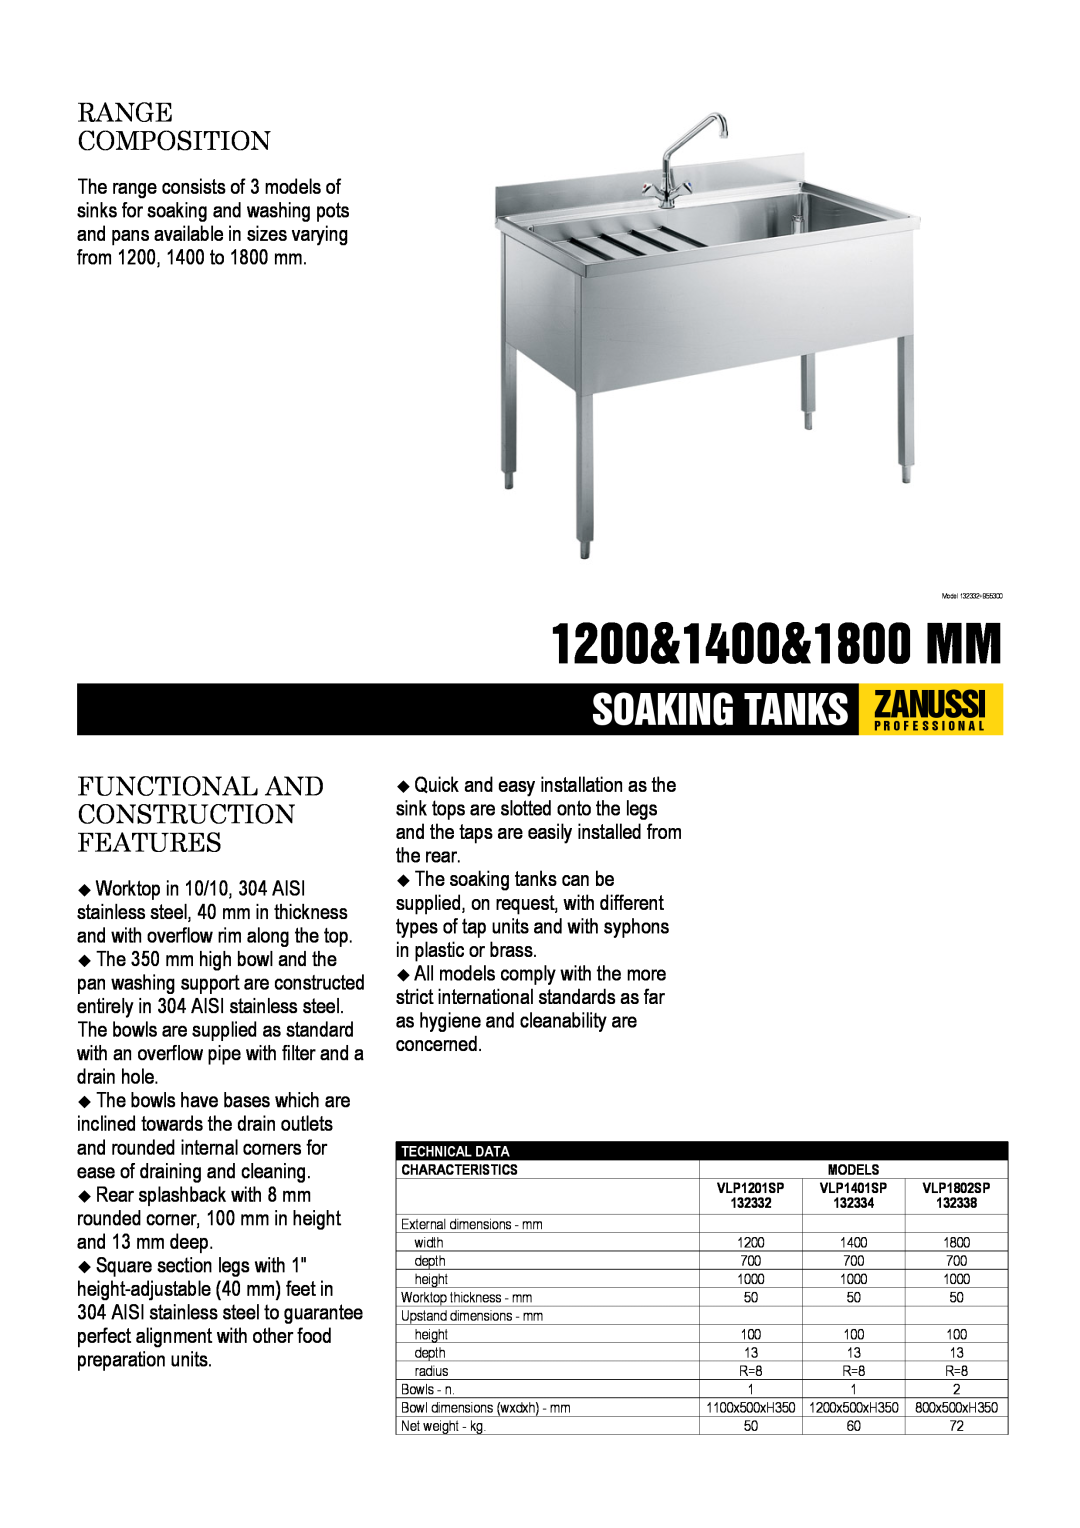 Zanussi VLP1201SP, VLP1802SP, 132334 dimensions 1200&1400&1800 MM, Range Composition, Functional And Construction Features 